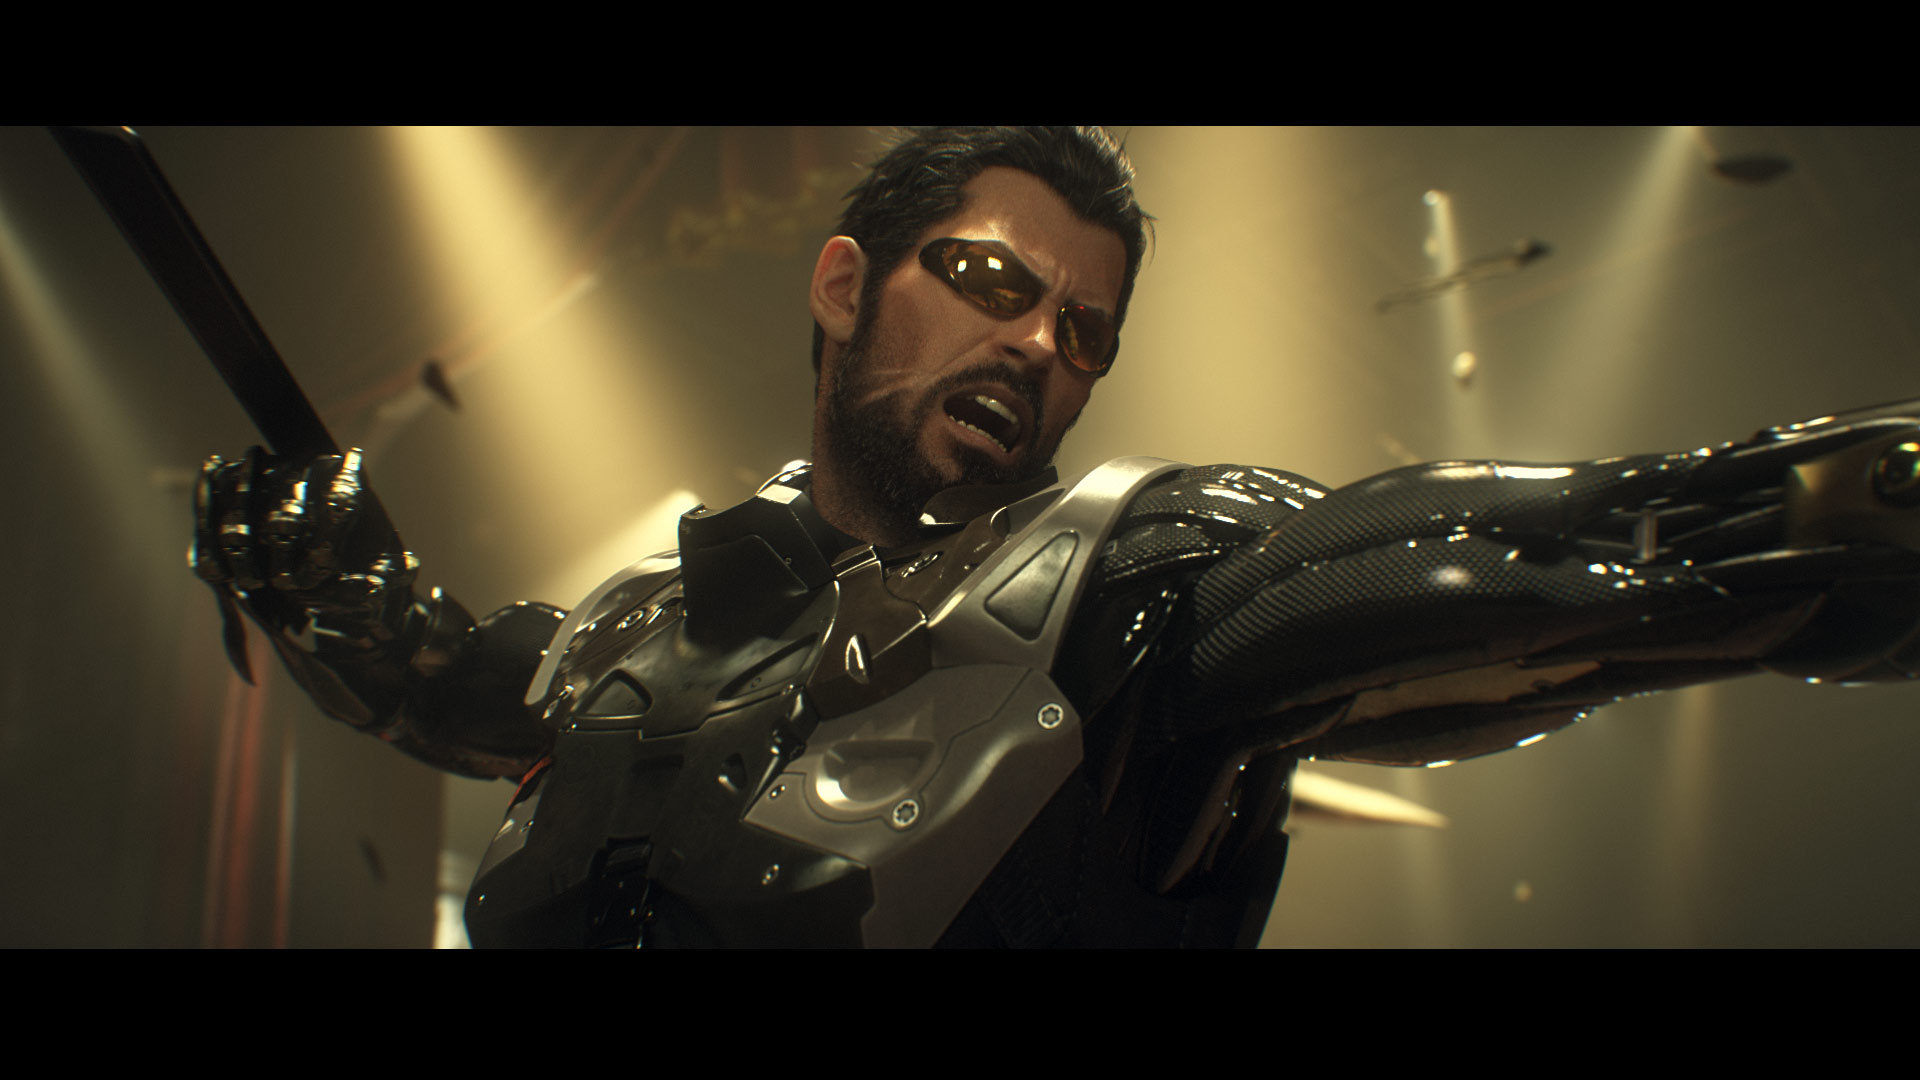 Amazing Deus Ex: Mankind Divided Pictures & Backgrounds